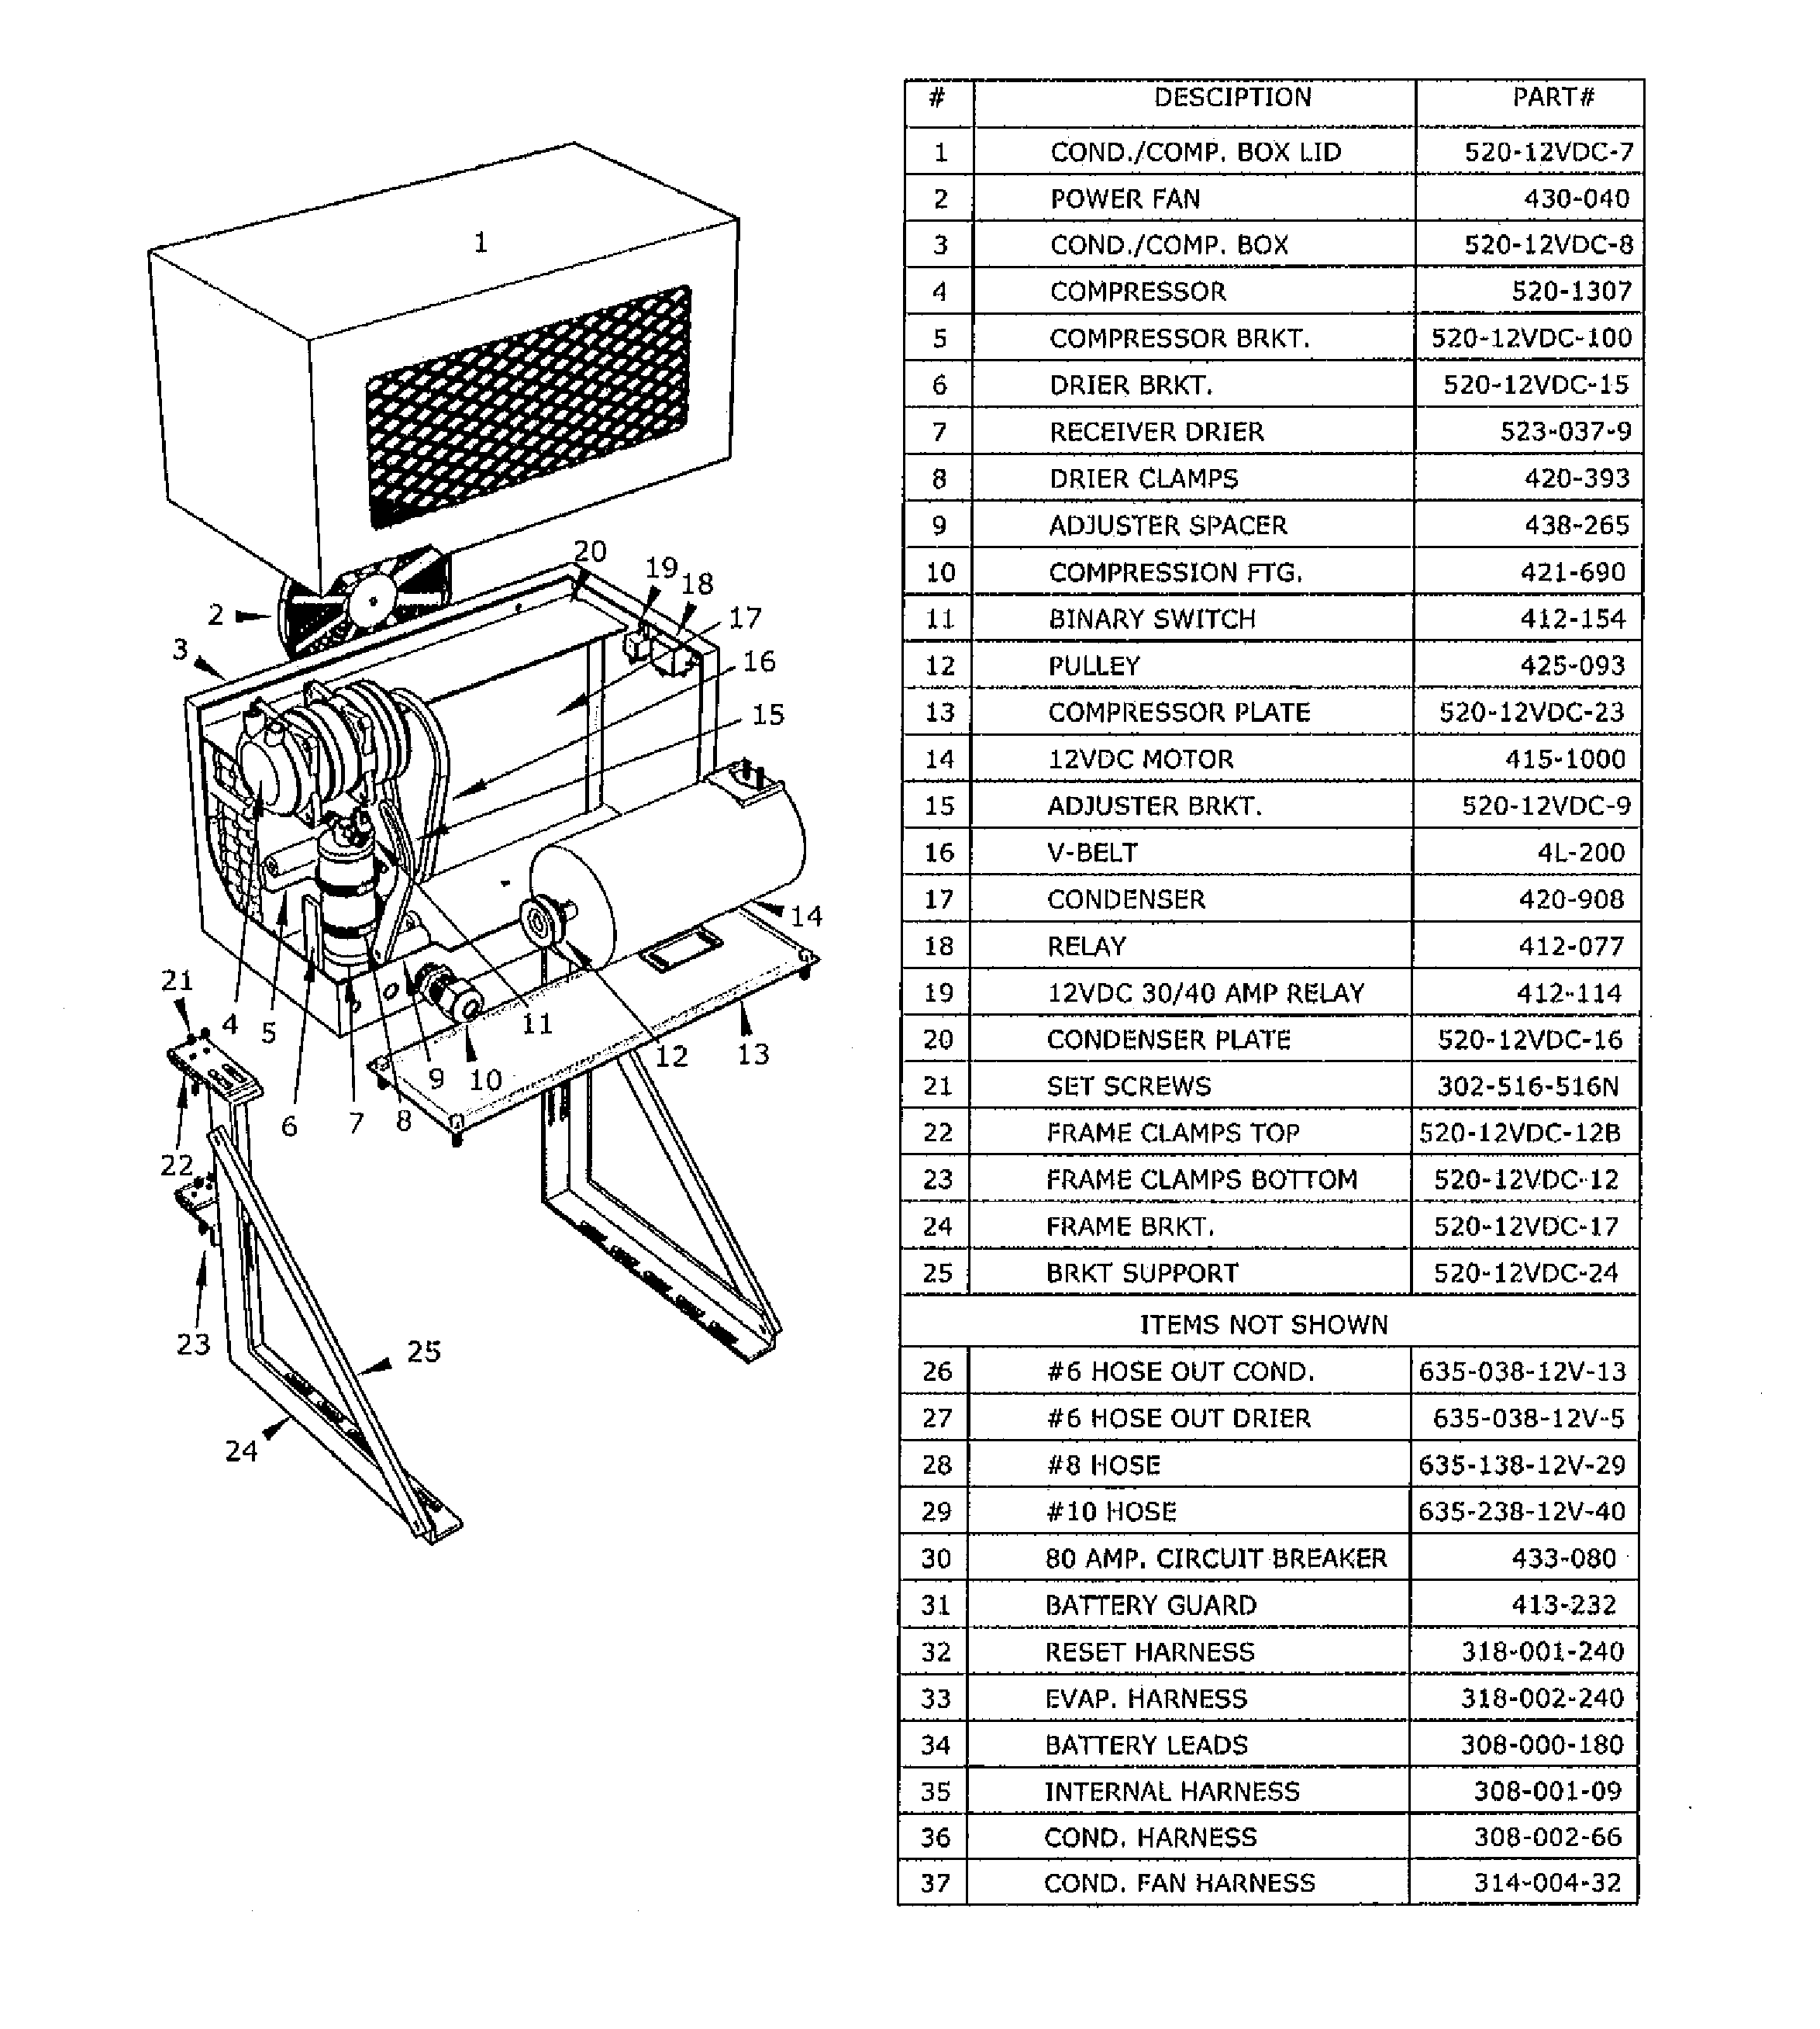 Truck Air Conditioner for Keeping Cabin Temperature Comfortable Independently of the Vehicle Engine